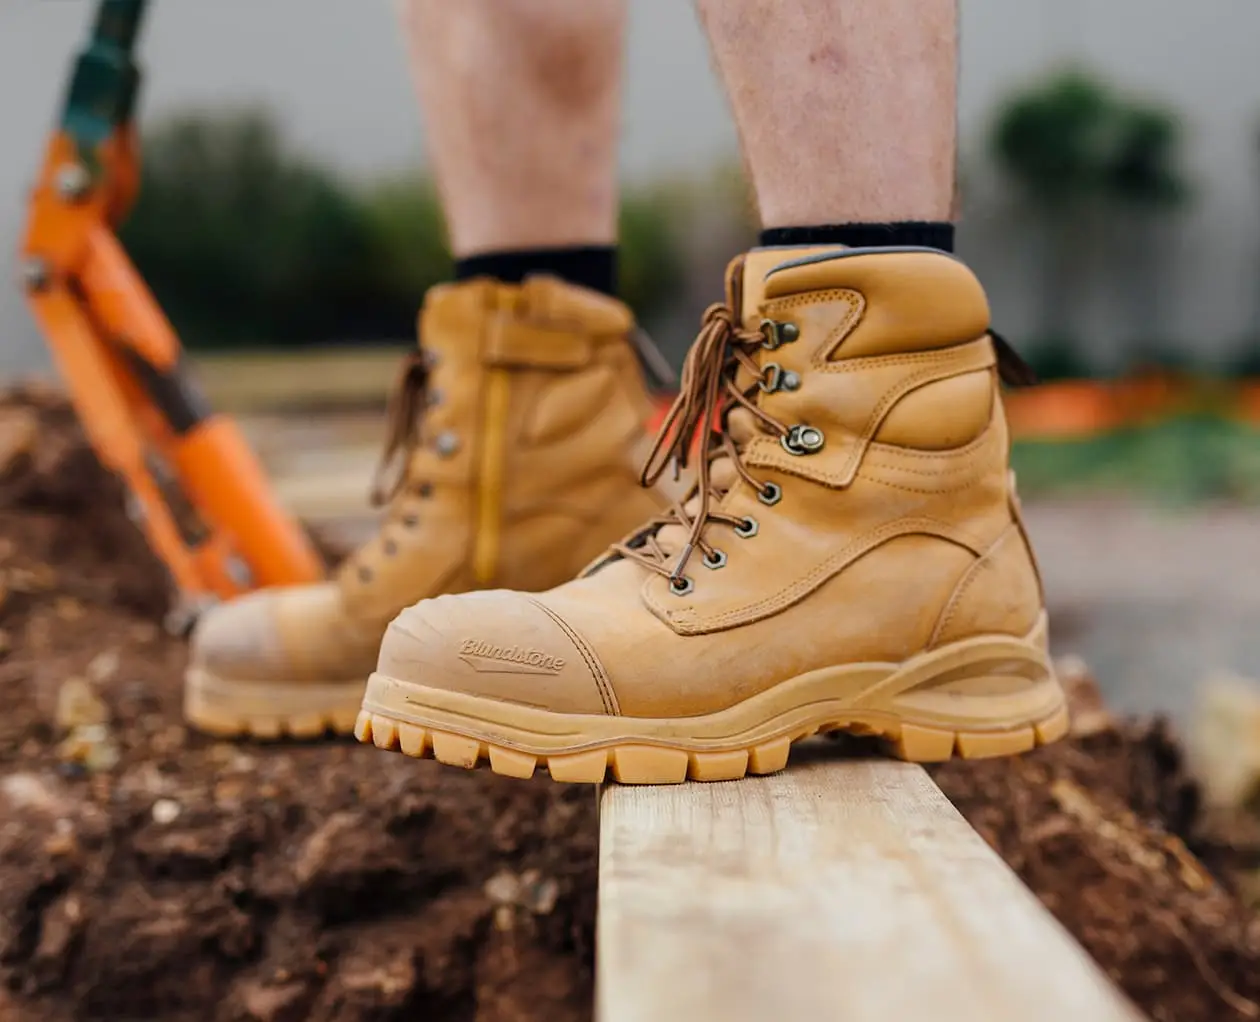 Blundstone | Cheap Work Boots